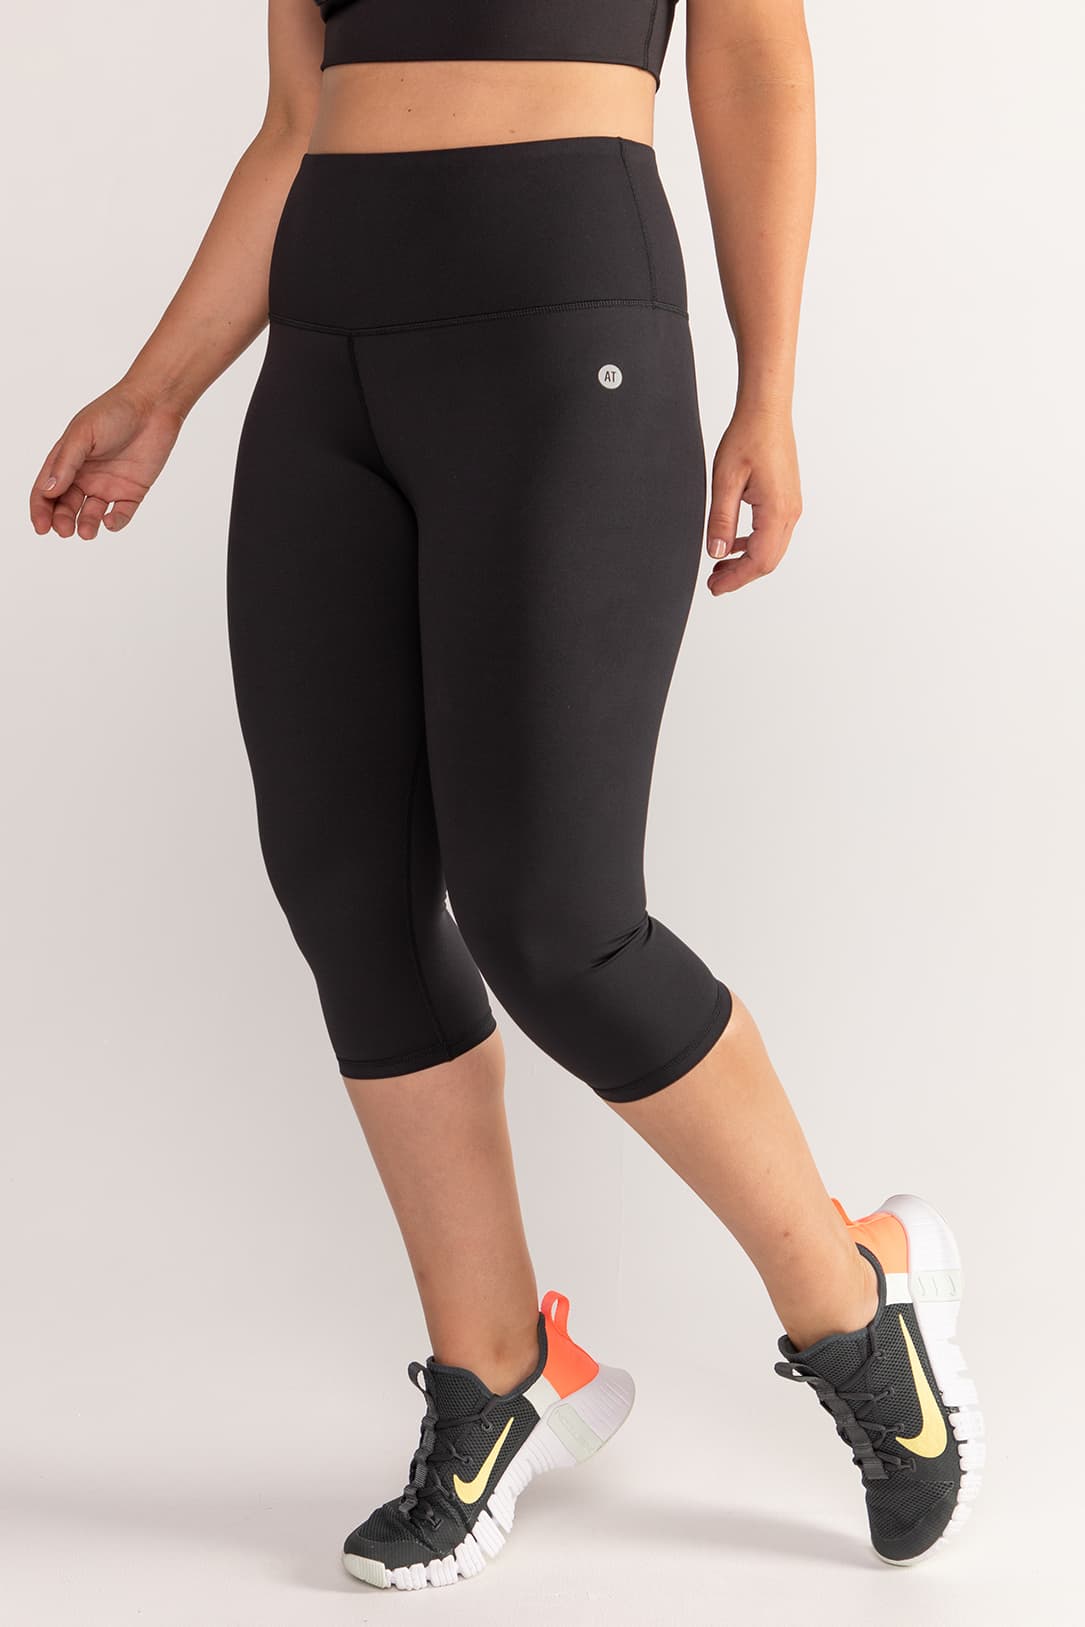 Essential 3/4 Length Tights - Black, Legging, Active Truth